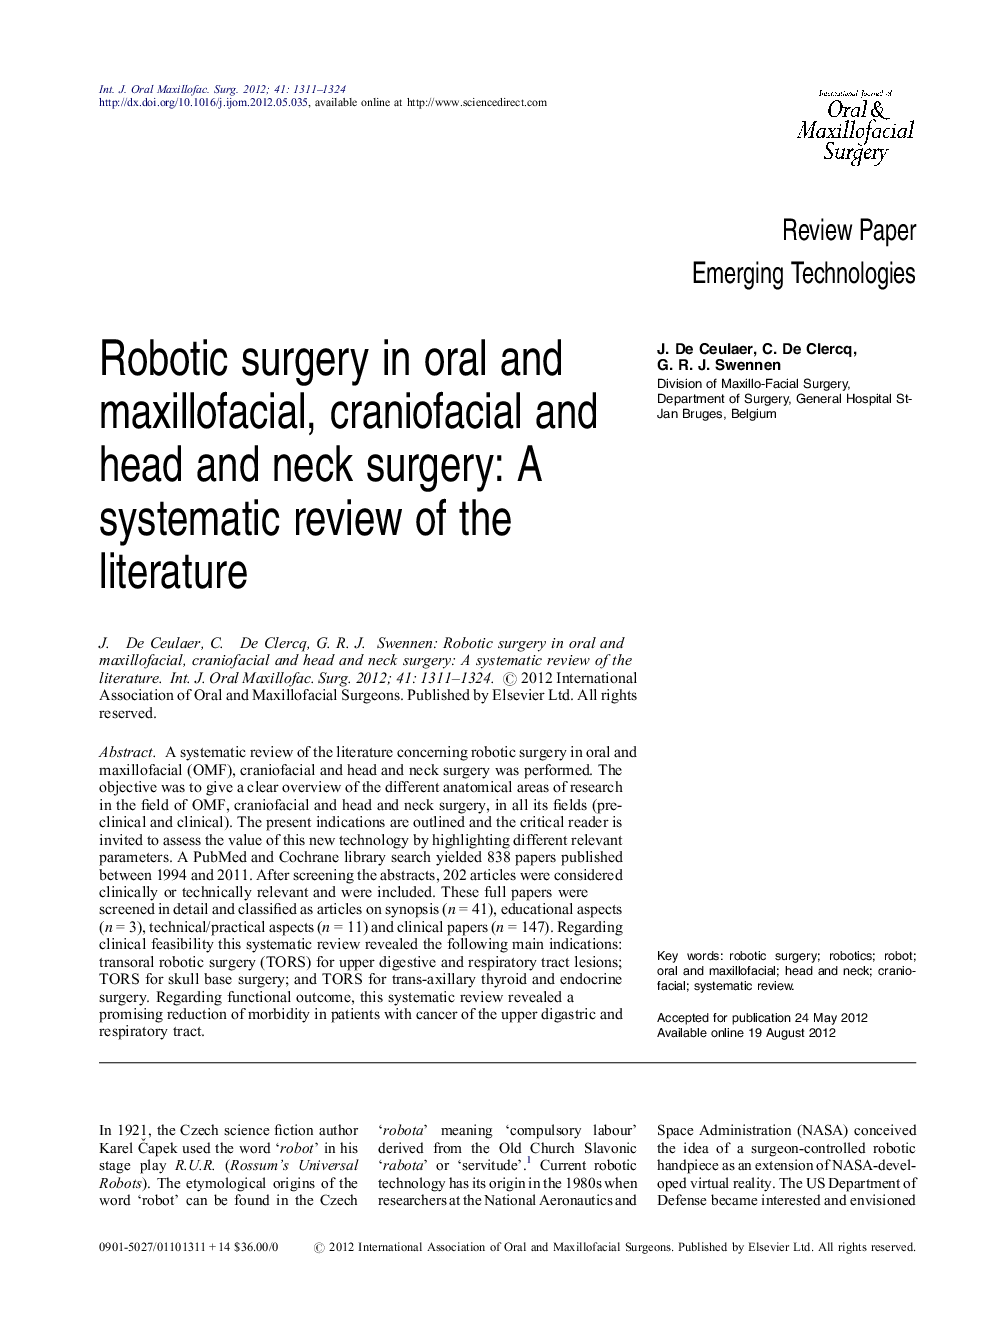 Robotic surgery in oral and maxillofacial, craniofacial and head and neck surgery: A systematic review of the literature